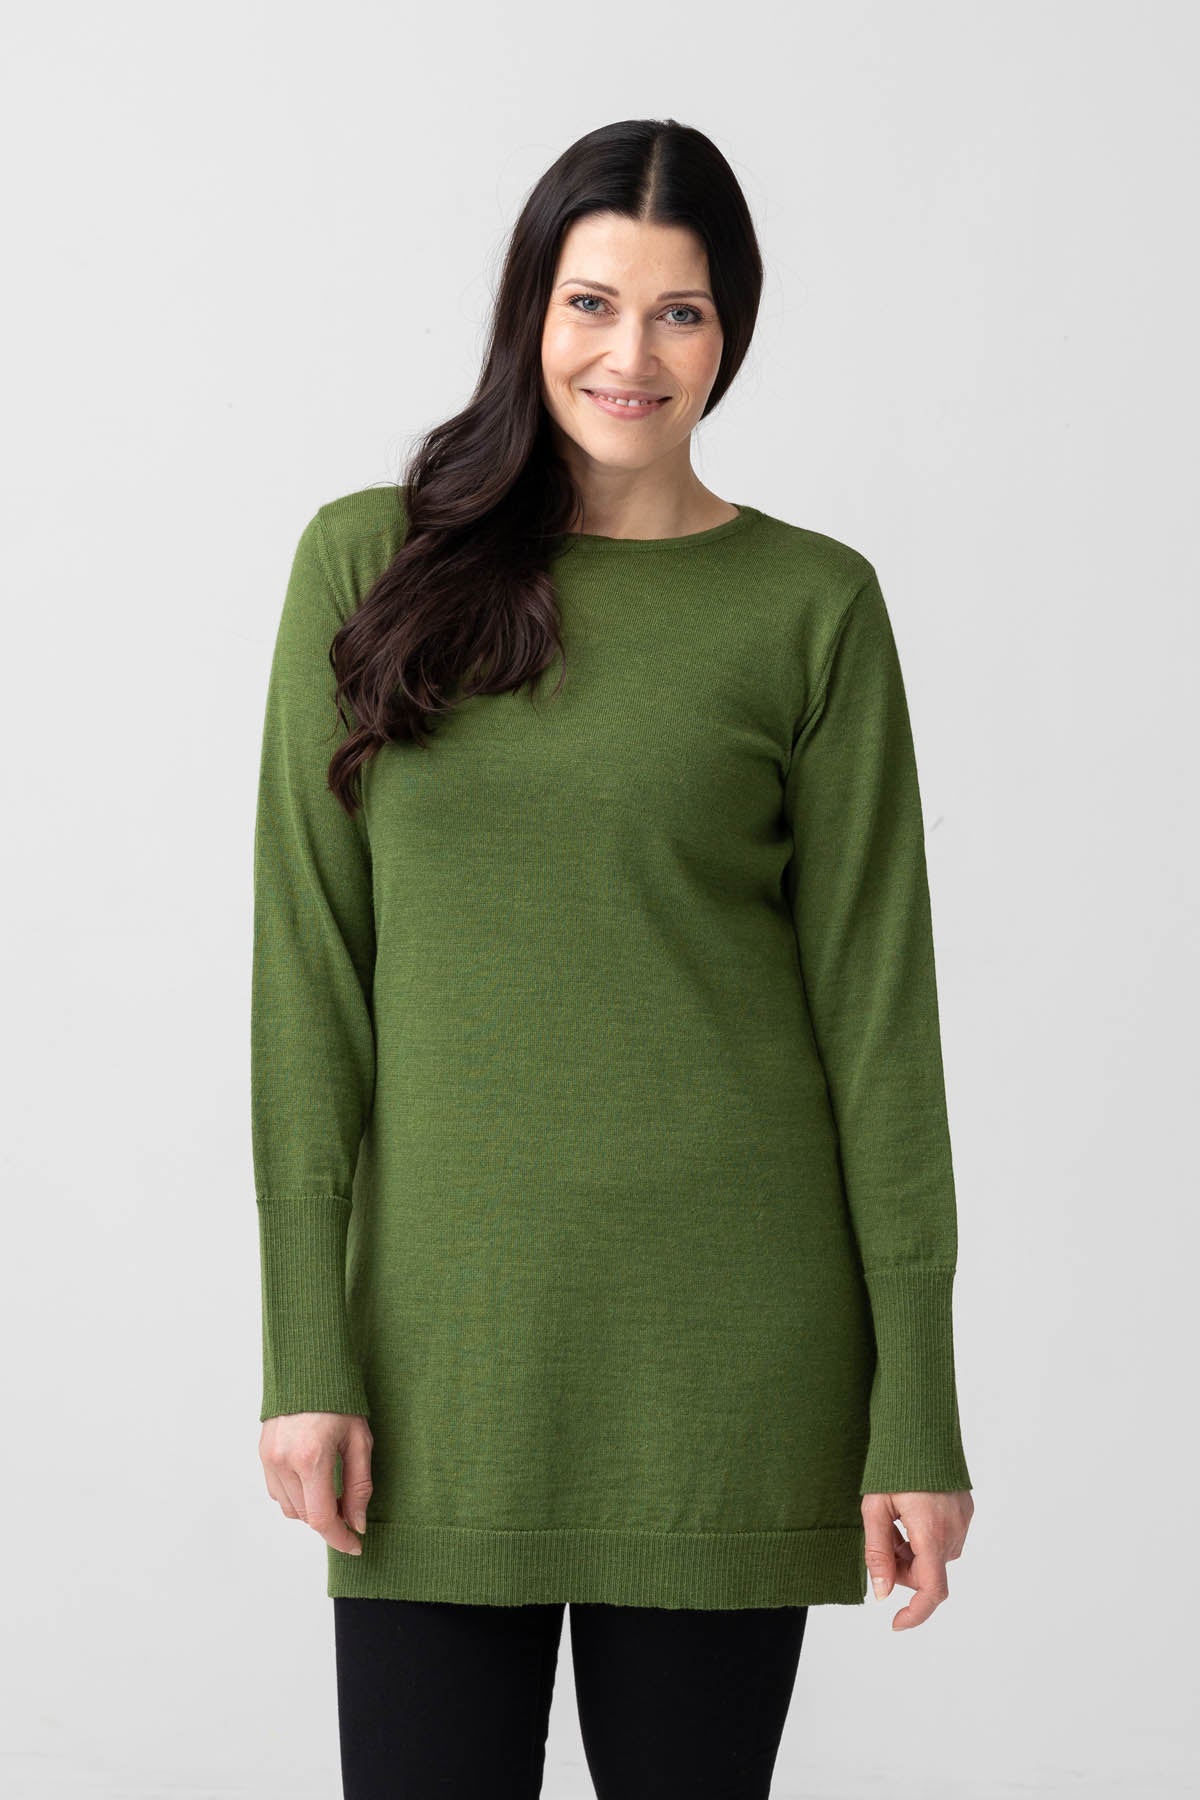 Sipán knitted tunic - olive green